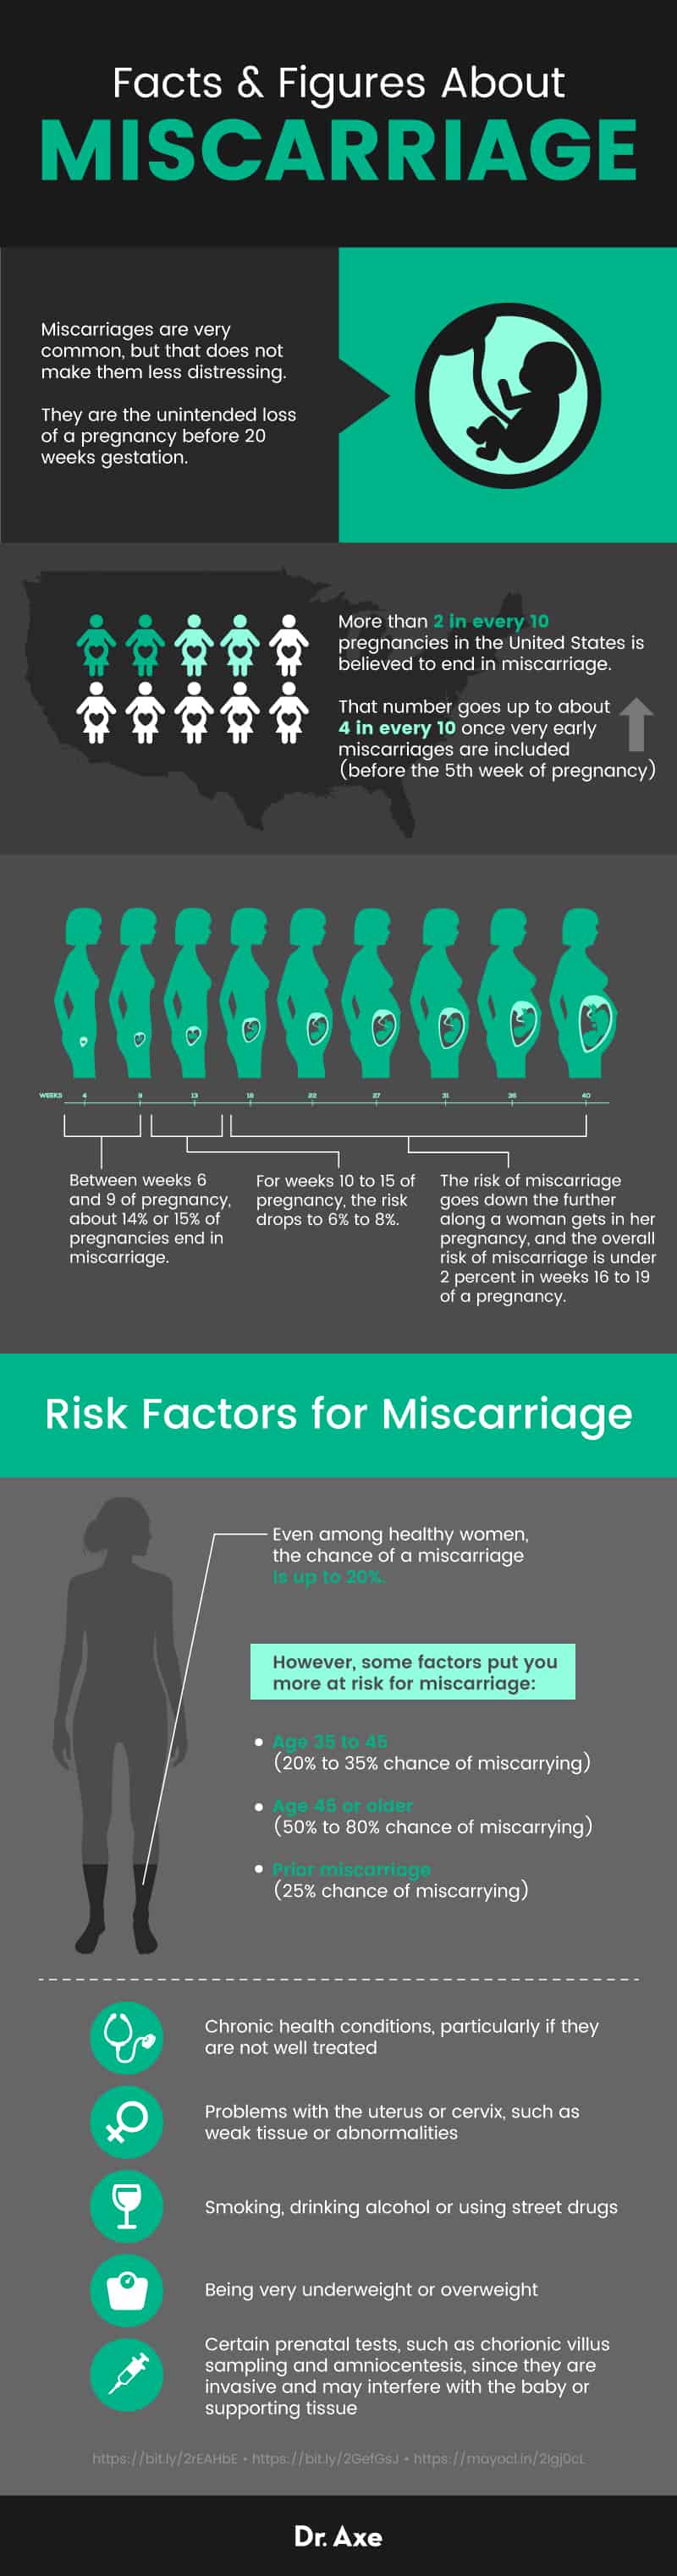 Signs of miscarriage: miscarriage facts & figures 